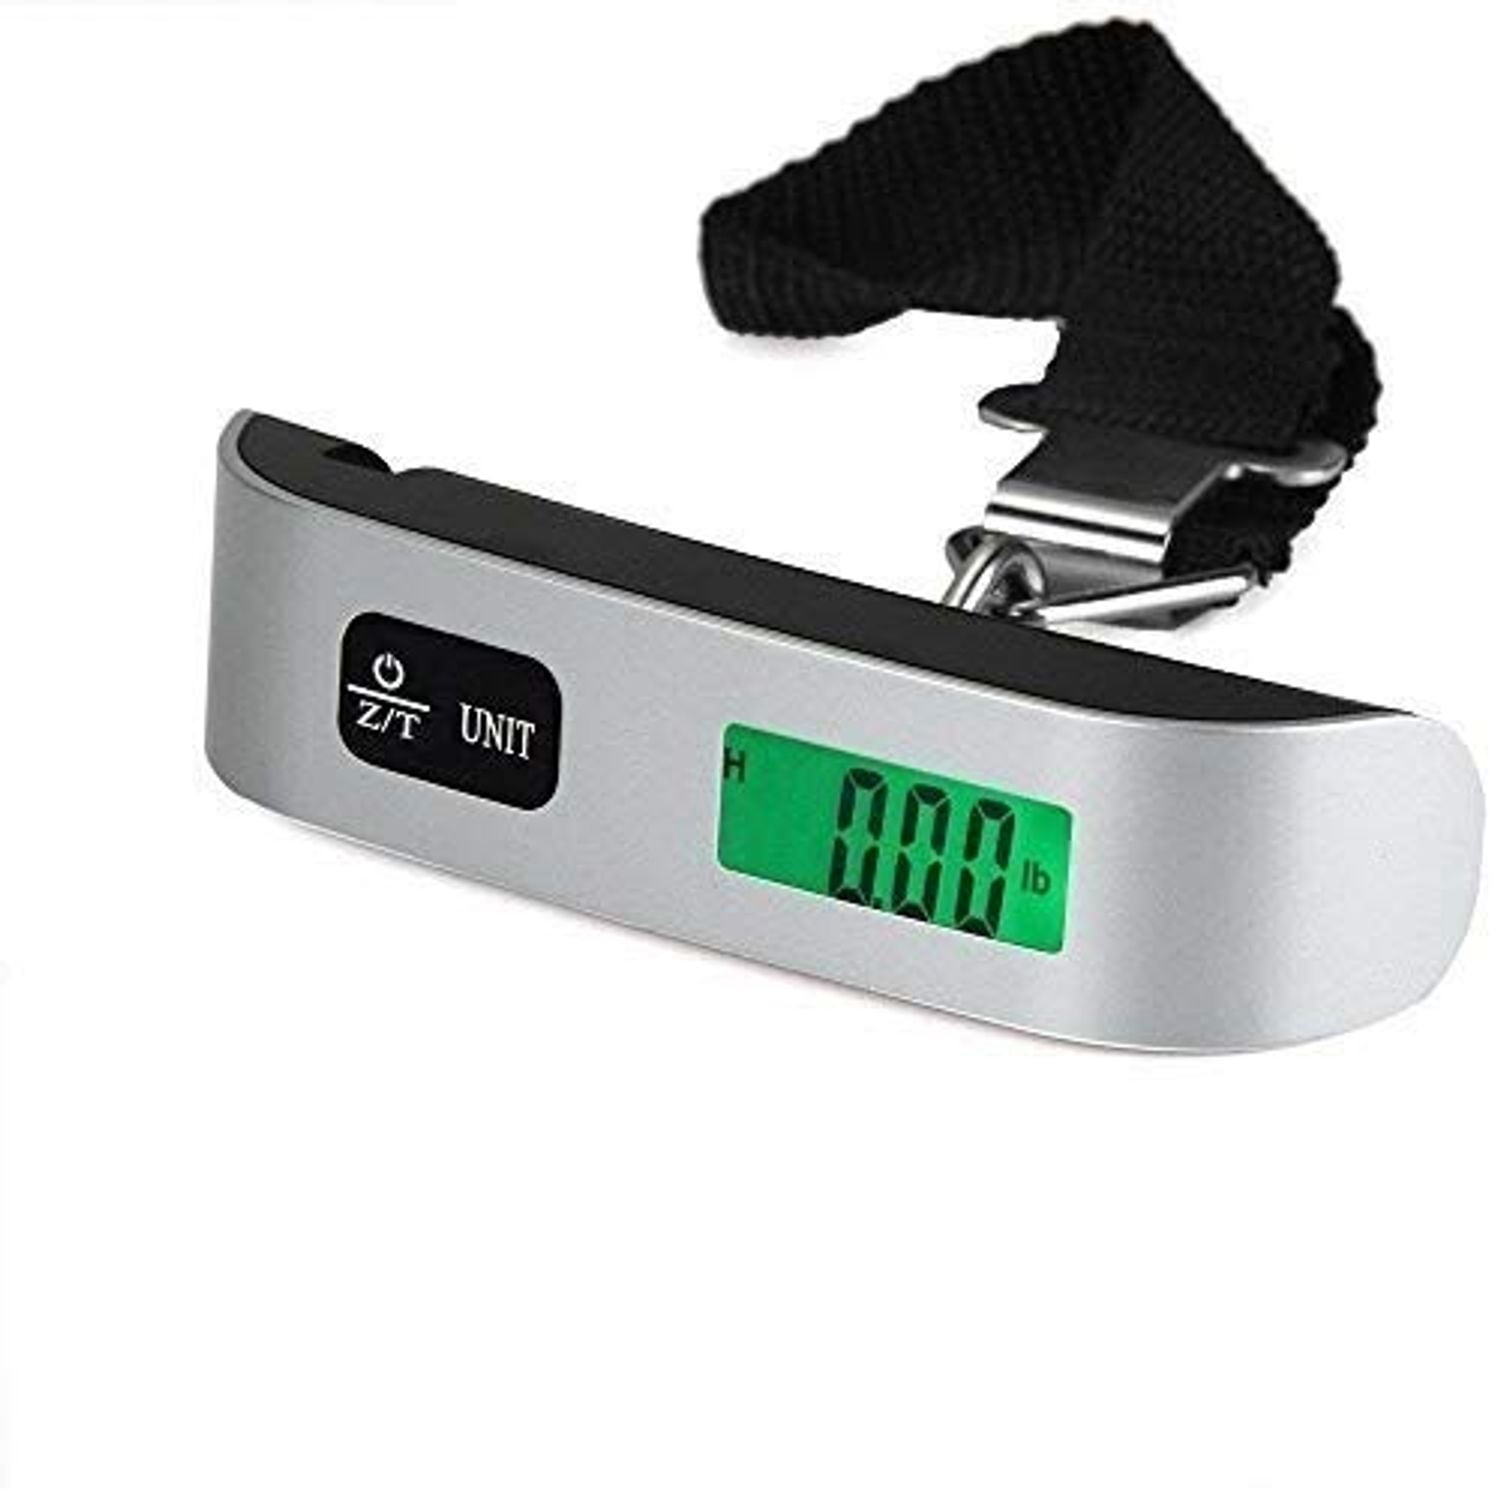 Dikley Digital Hanging Luggage Scale 110LB/50KG Tare Function for Travel Fishing Home 